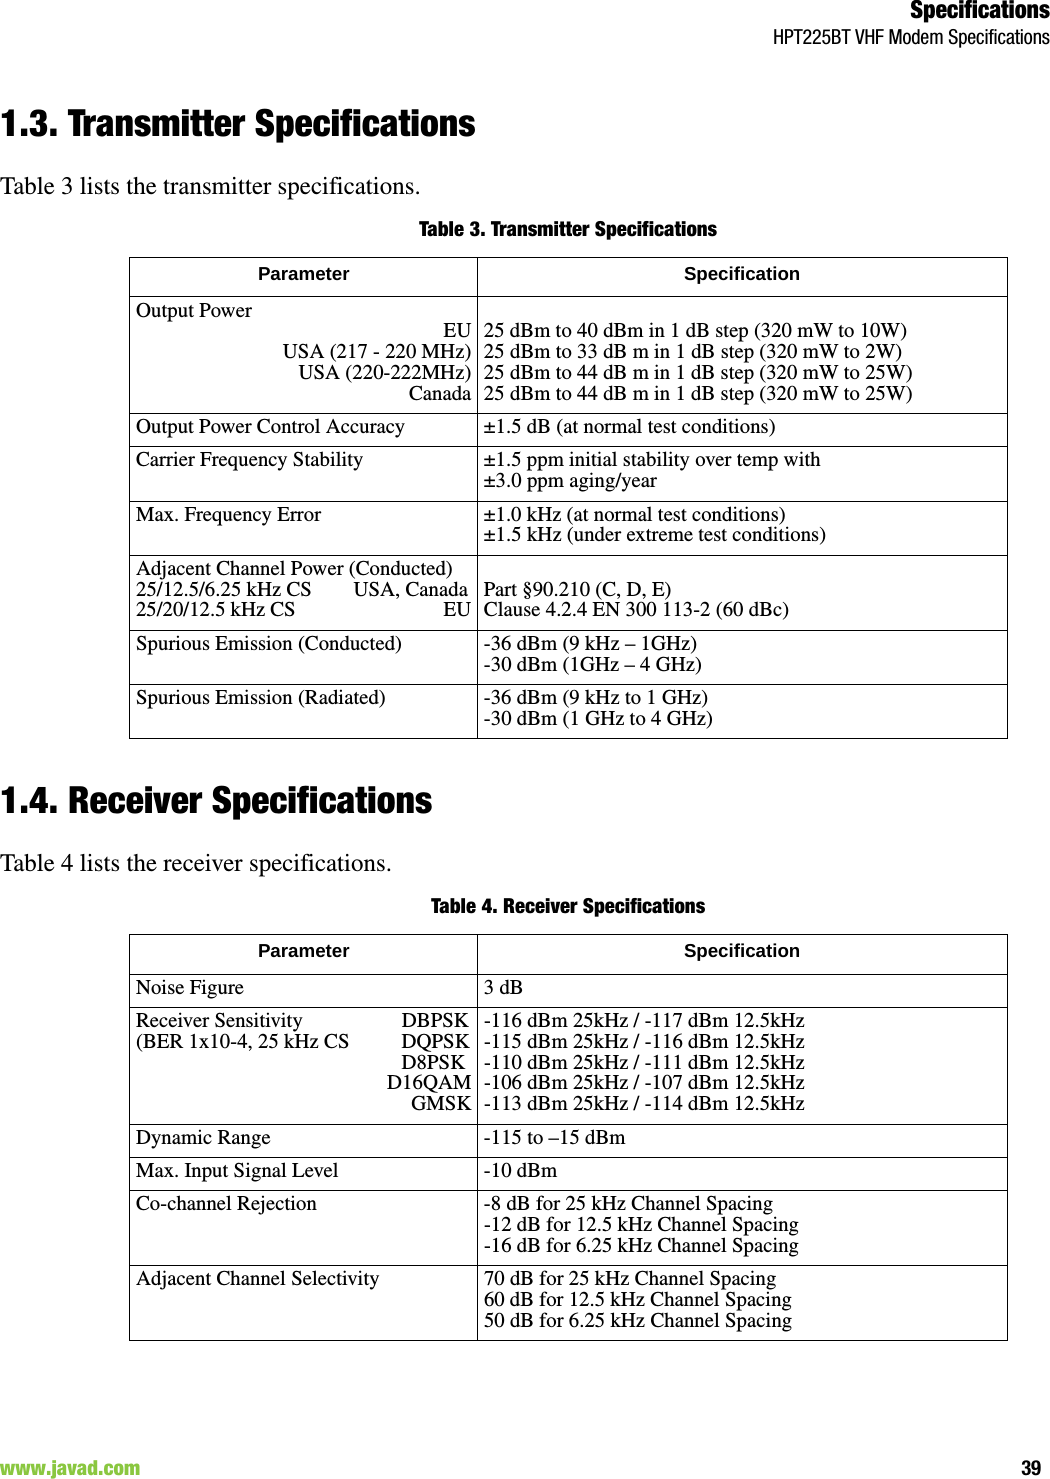 SpecificationsHPT225BT VHF Modem Specifications39www.javad.com                                                                                                                                                        1.3. Transmitter SpecificationsTable 3 lists the transmitter specifications.Table 3. Transmitter Specifications1.4. Receiver SpecificationsTable 4 lists the receiver specifications.Table 4. Receiver SpecificationsParameter SpecificationOutput Power                                        EUUSA (217 - 220 MHz)USA (220-222MHz)Canada25 dBm to 40 dBm in 1 dB step (320 mW to 10W)25 dBm to 33 dB m in 1 dB step (320 mW to 2W)25 dBm to 44 dB m in 1 dB step (320 mW to 25W)25 dBm to 44 dB m in 1 dB step (320 mW to 25W)Output Power Control Accuracy ±1.5 dB (at normal test conditions)Carrier Frequency Stability ±1.5 ppm initial stability over temp with±3.0 ppm aging/yearMax. Frequency Error ±1.0 kHz (at normal test conditions)±1.5 kHz (under extreme test conditions)Adjacent Channel Power (Conducted)25/12.5/6.25 kHz CS        USA, Canada25/20/12.5 kHz CS                              EUPart §90.210 (C, D, E)Clause 4.2.4 EN 300 113-2 (60 dBc)Spurious Emission (Conducted) -36 dBm (9 kHz – 1GHz) -30 dBm (1GHz – 4 GHz)Spurious Emission (Radiated) -36 dBm (9 kHz to 1 GHz)-30 dBm (1 GHz to 4 GHz)Parameter SpecificationNoise Figure 3 dBReceiver Sensitivity                   DBPSK(BER 1x10-4, 25 kHz CS          DQPSK                                                   D8PSKD16QAMGMSK-116 dBm 25kHz / -117 dBm 12.5kHz-115 dBm 25kHz / -116 dBm 12.5kHz-110 dBm 25kHz / -111 dBm 12.5kHz-106 dBm 25kHz / -107 dBm 12.5kHz-113 dBm 25kHz / -114 dBm 12.5kHzDynamic Range -115 to –15 dBmMax. Input Signal Level -10 dBmCo-channel Rejection -8 dB for 25 kHz Channel Spacing-12 dB for 12.5 kHz Channel Spacing-16 dB for 6.25 kHz Channel SpacingAdjacent Channel Selectivity 70 dB for 25 kHz Channel Spacing60 dB for 12.5 kHz Channel Spacing50 dB for 6.25 kHz Channel Spacing